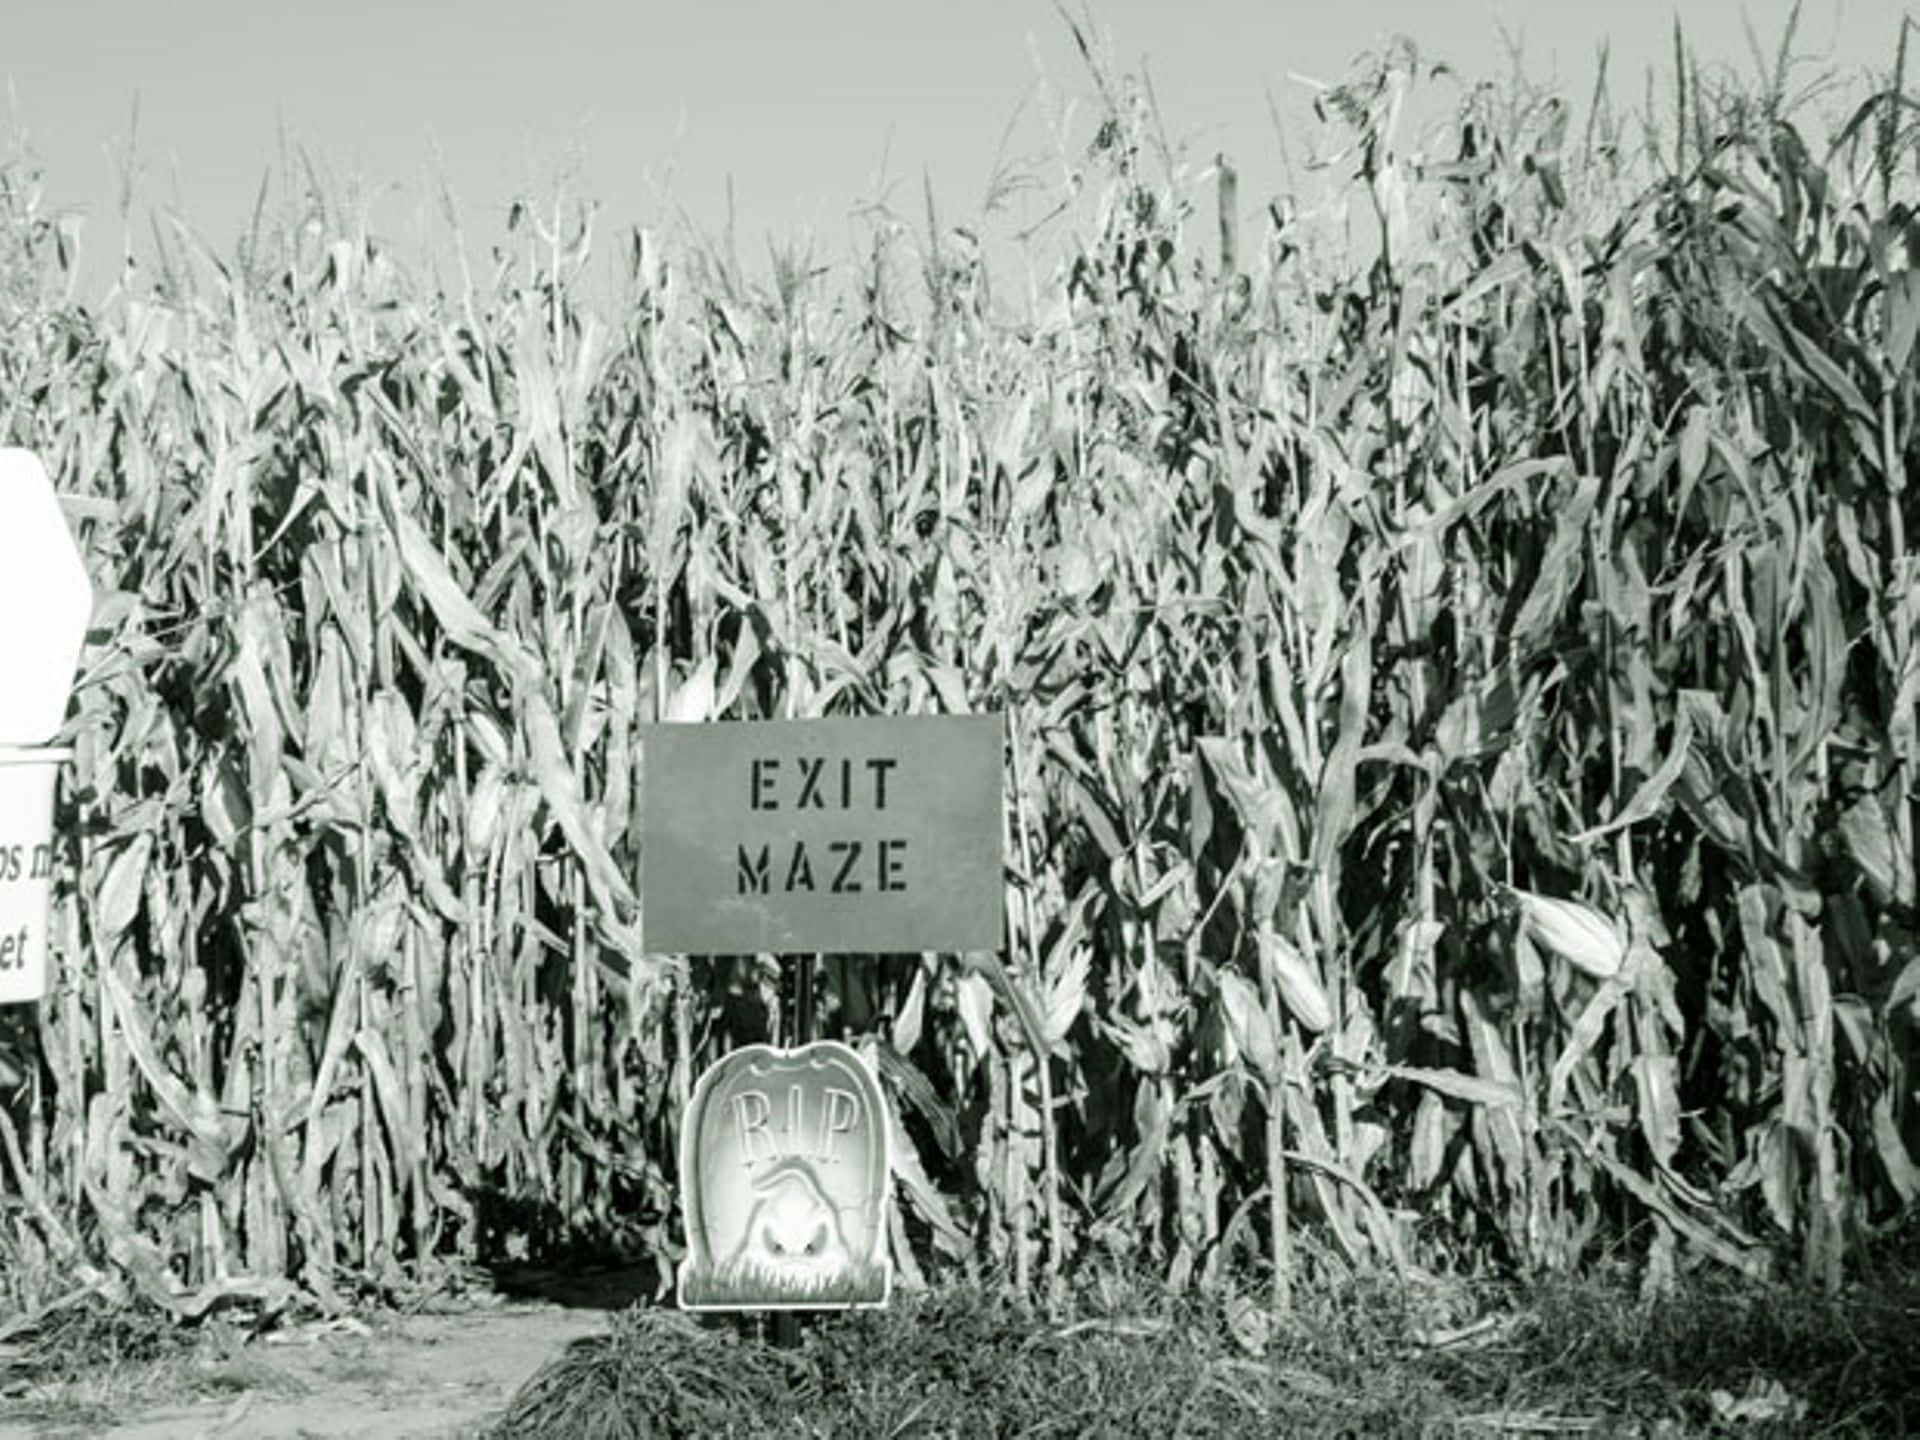 Get Ready for Halloween Fun with Haunted Corn Mazes Wallpaper